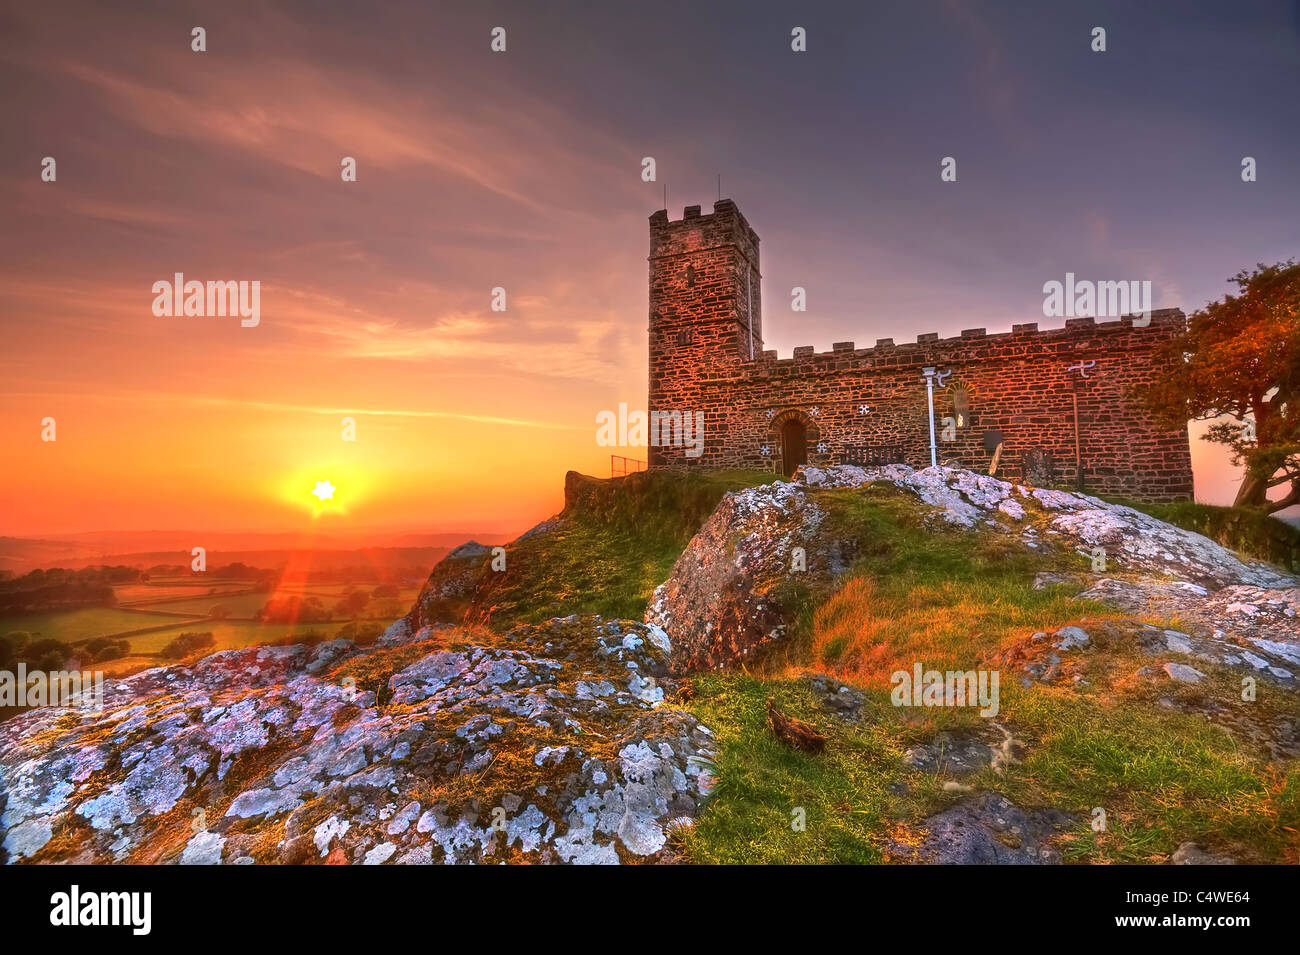 Sunset at Brentor church towering over the countryside. Stock Photo